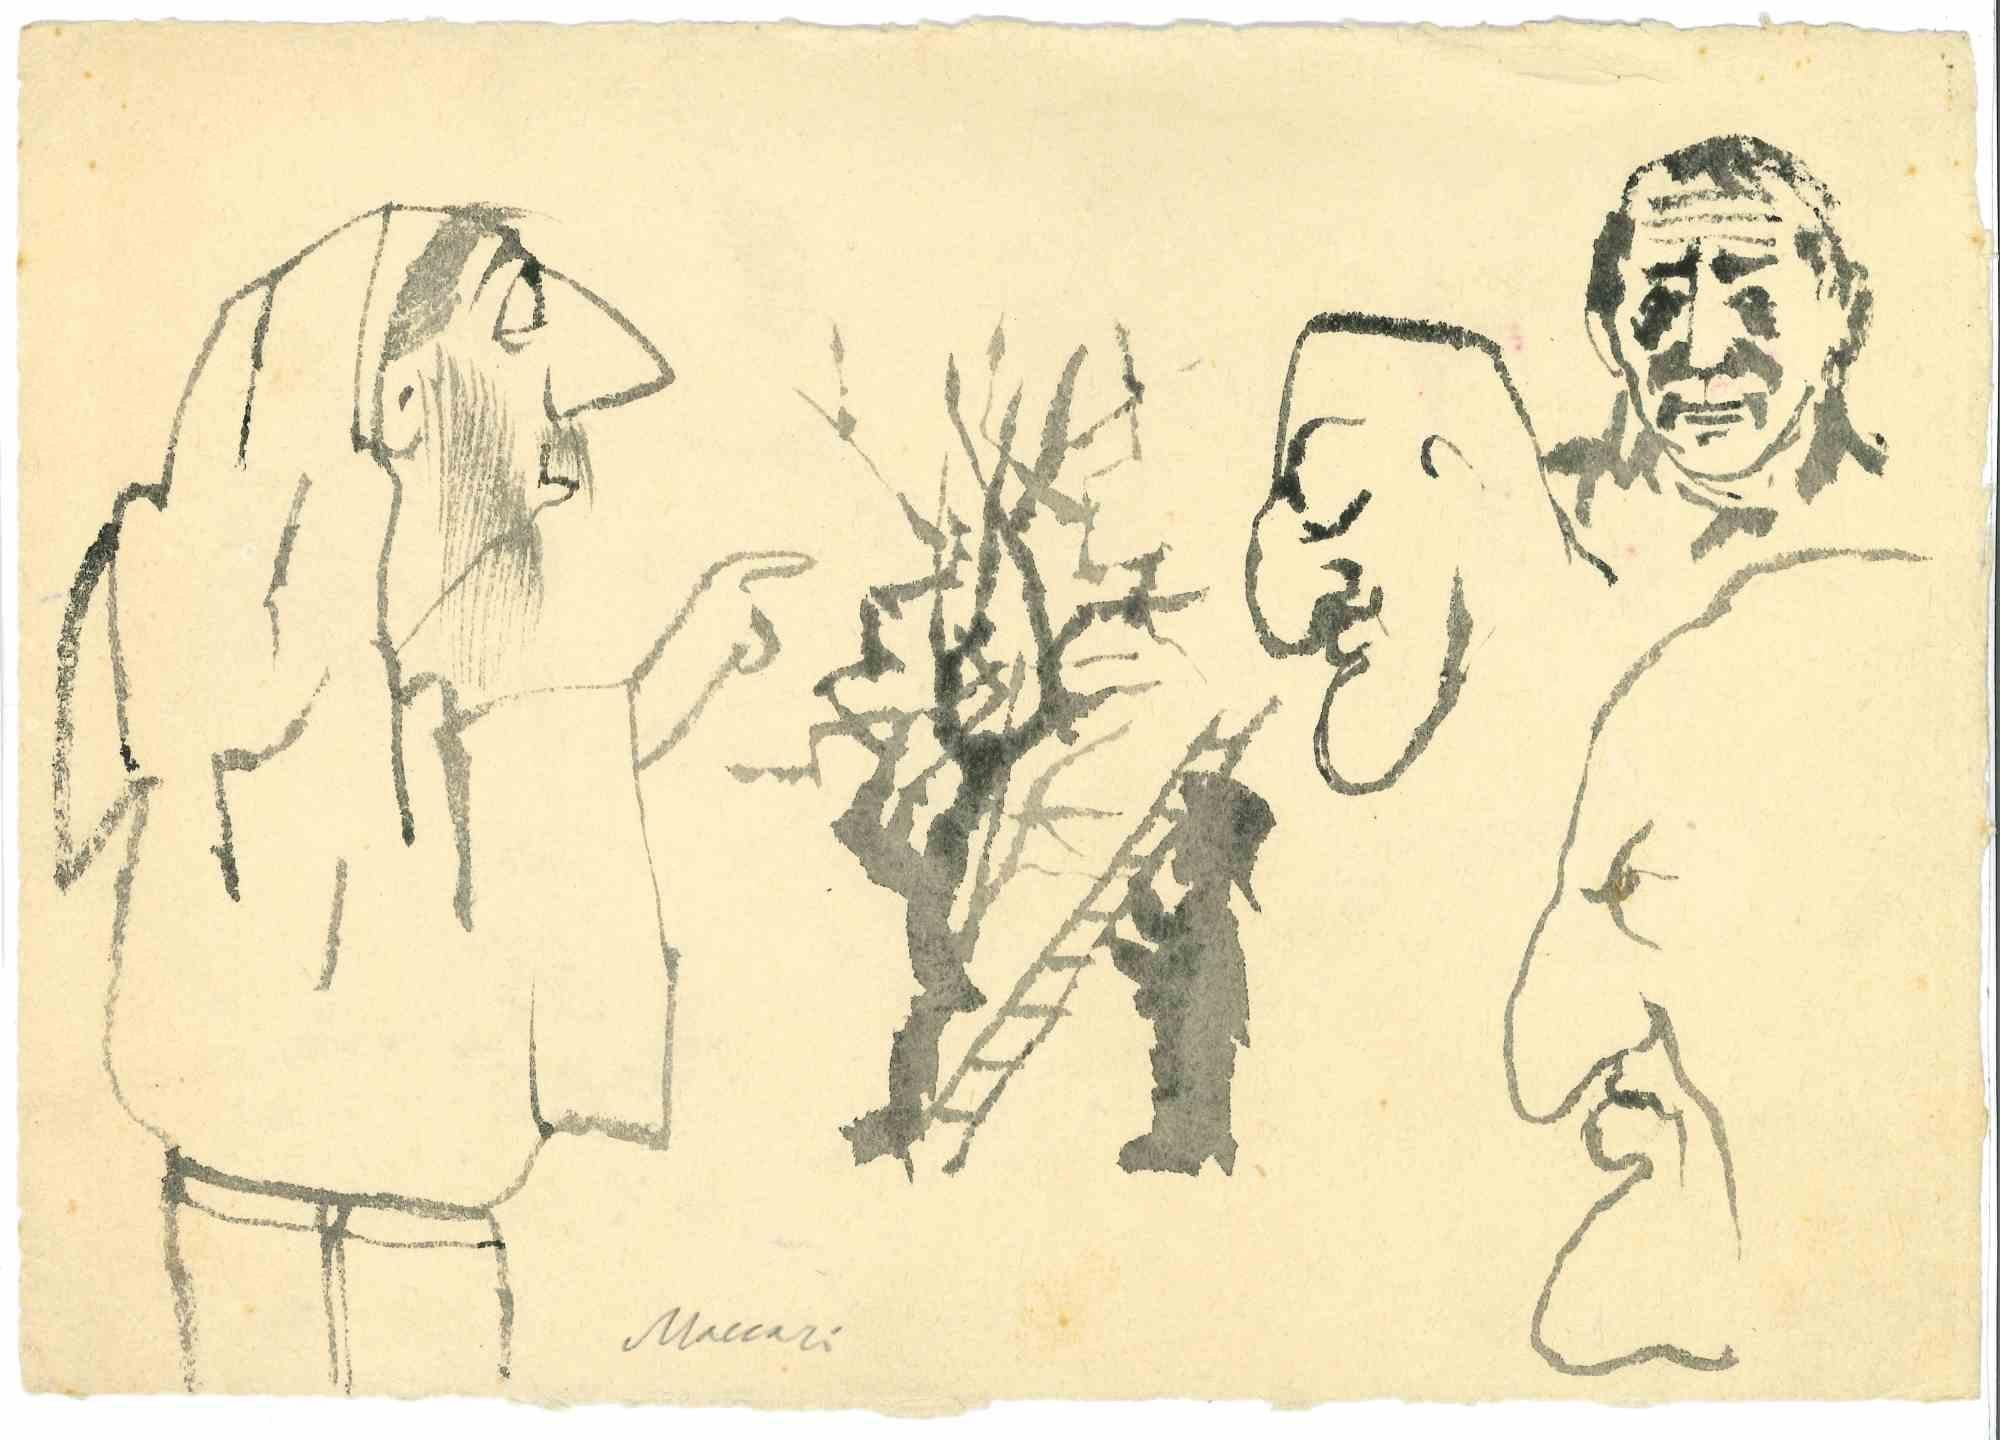 Figures is a watercolor Drawing realized by Mino Maccari  (1924-1989) in the Mid-20th Century.

Hand-signed on the lower.

Good conditions.

Mino Maccari (Siena, 1924-Rome, June 16, 1989) was an Italian writer, painter, engraver and journalist,